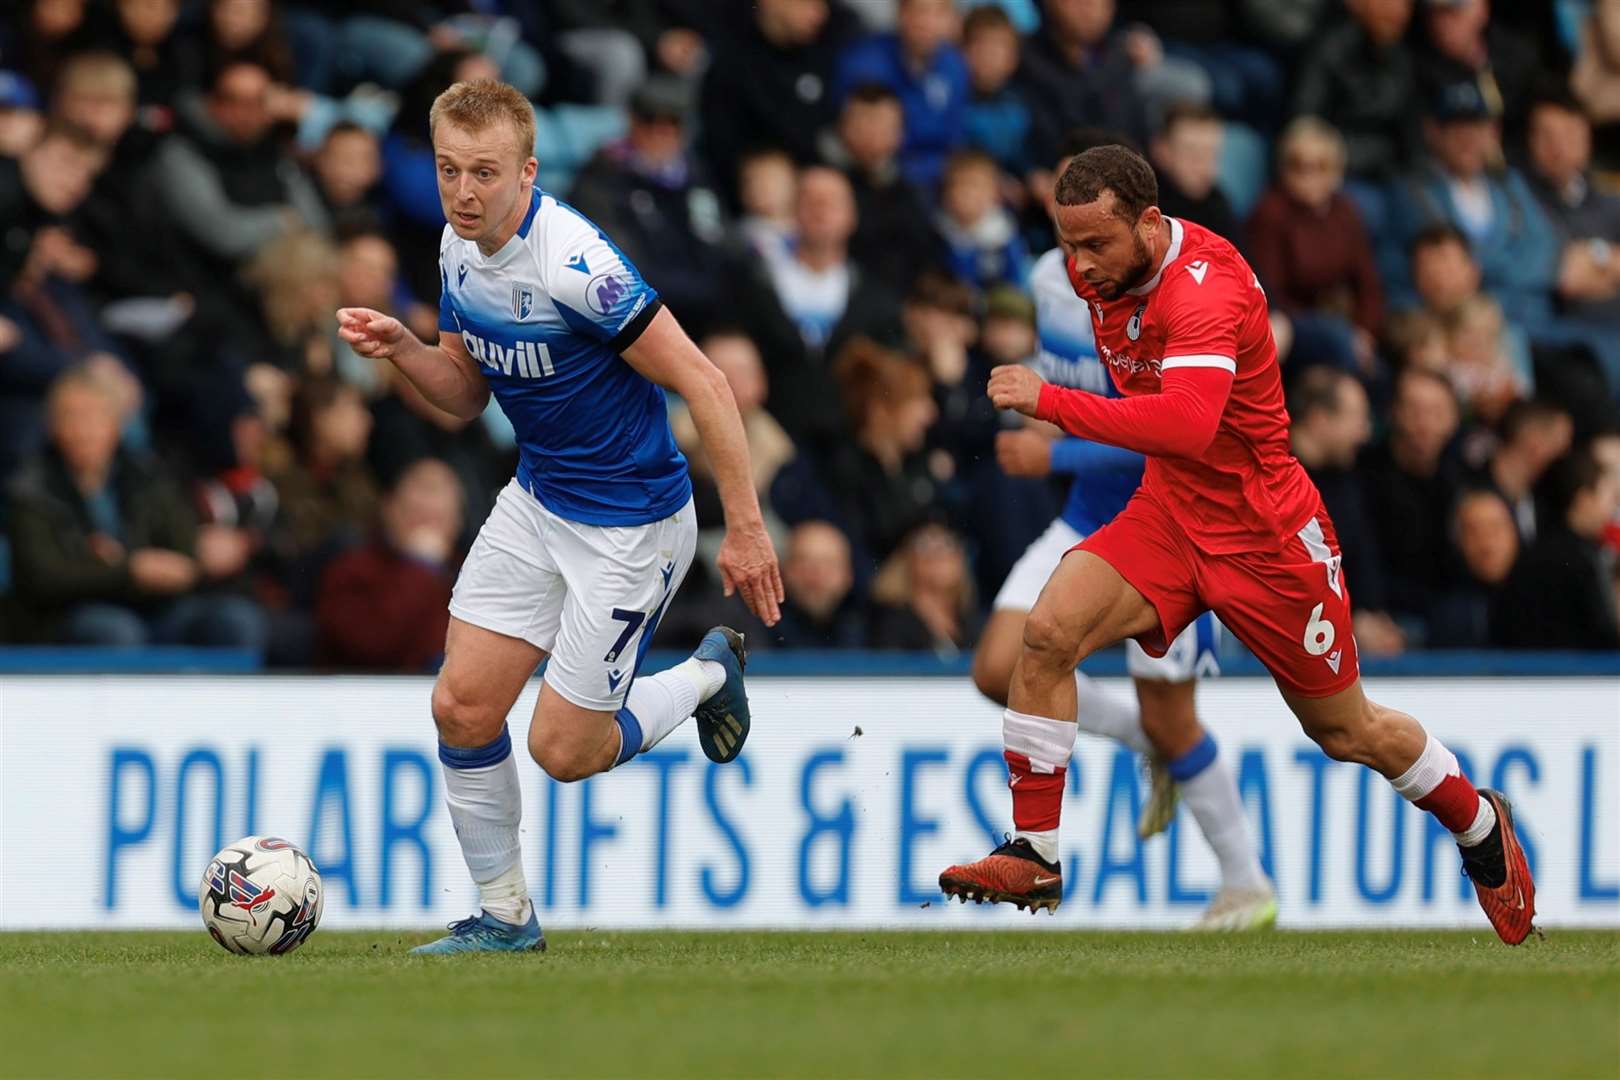 George Lapslie drives forward as Gillingham take on Grimsby Picture: @Julian_KPI